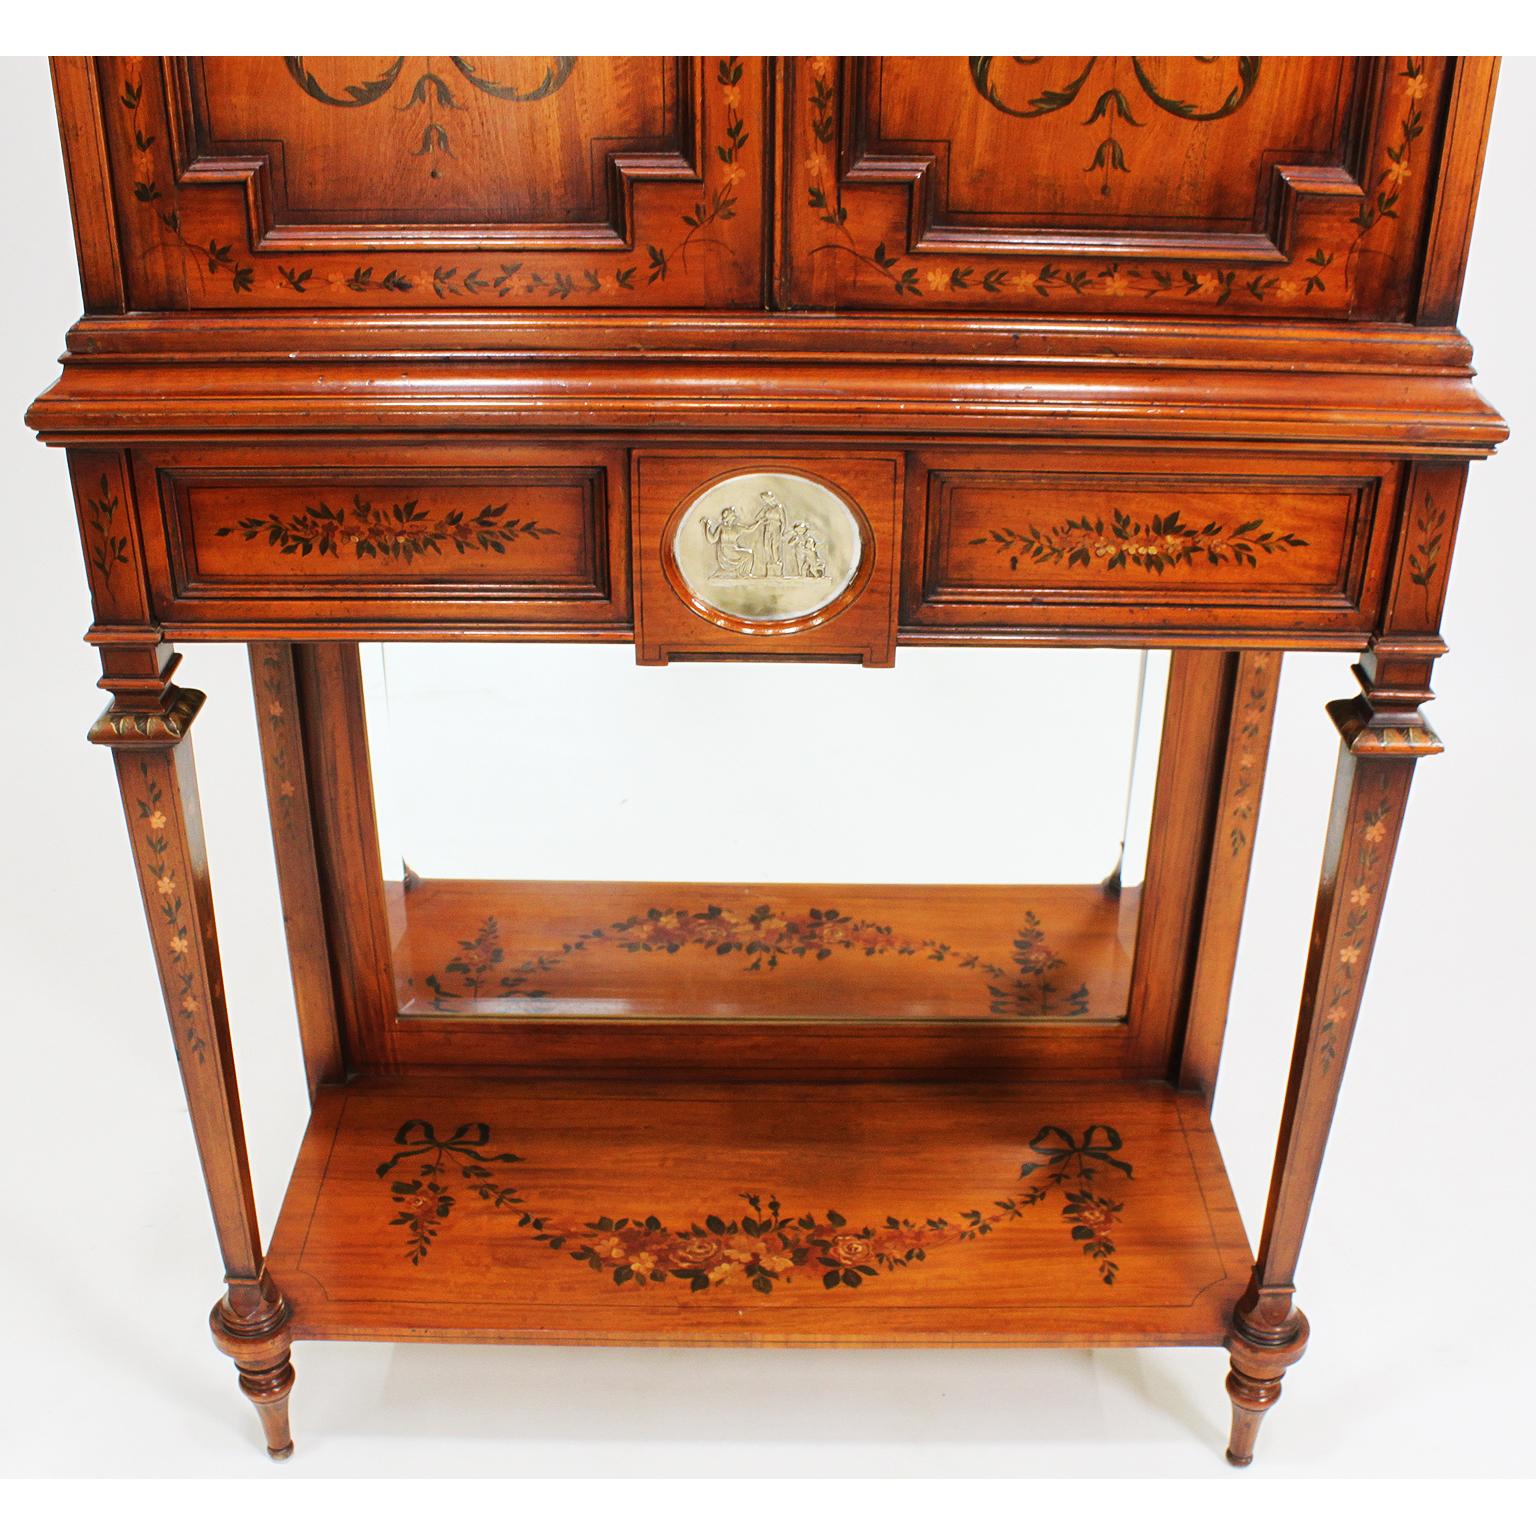 English 19th Century Edwardian Style Painted Satinwood & Silver-Mounted Cabinet For Sale 4